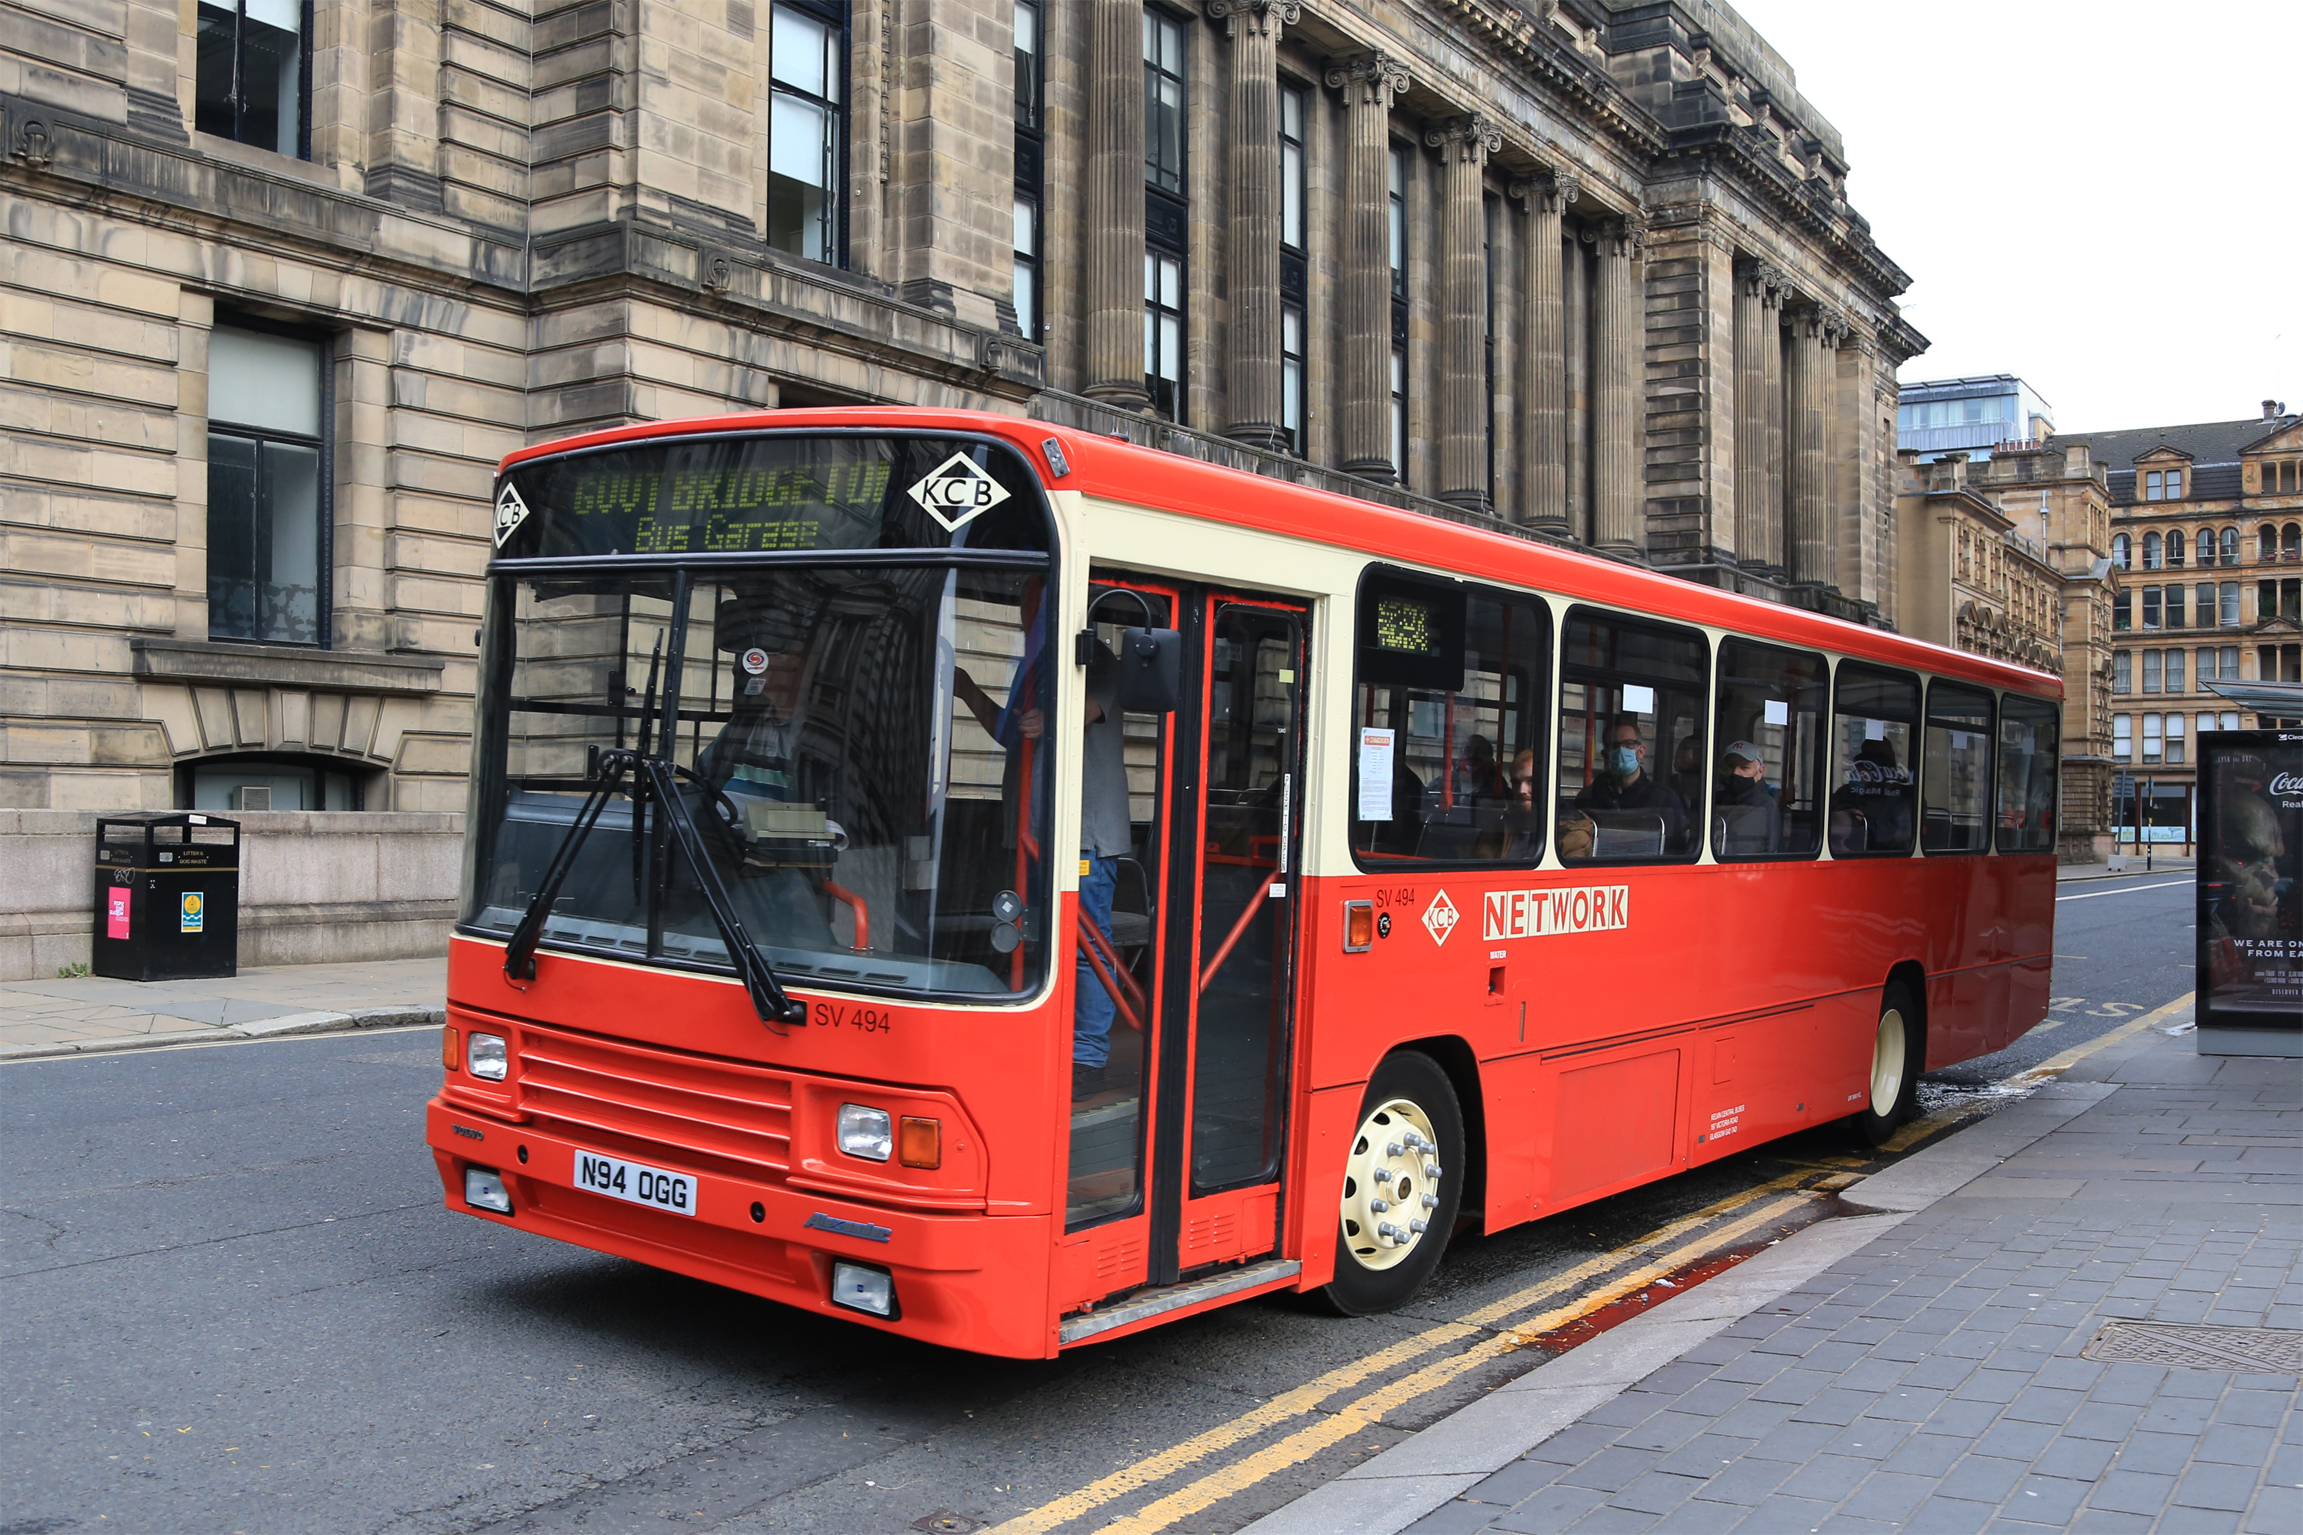 Following the merger of Scottish Bus Group’s Kelvin and Central businesses, the company traded for a time as KCB Network, a livery recalled by this Alexander PS bodied Volvo B10M. It is seen just off Glasgow’s George Square against a background of buildings often used by film makers as a double for American cities